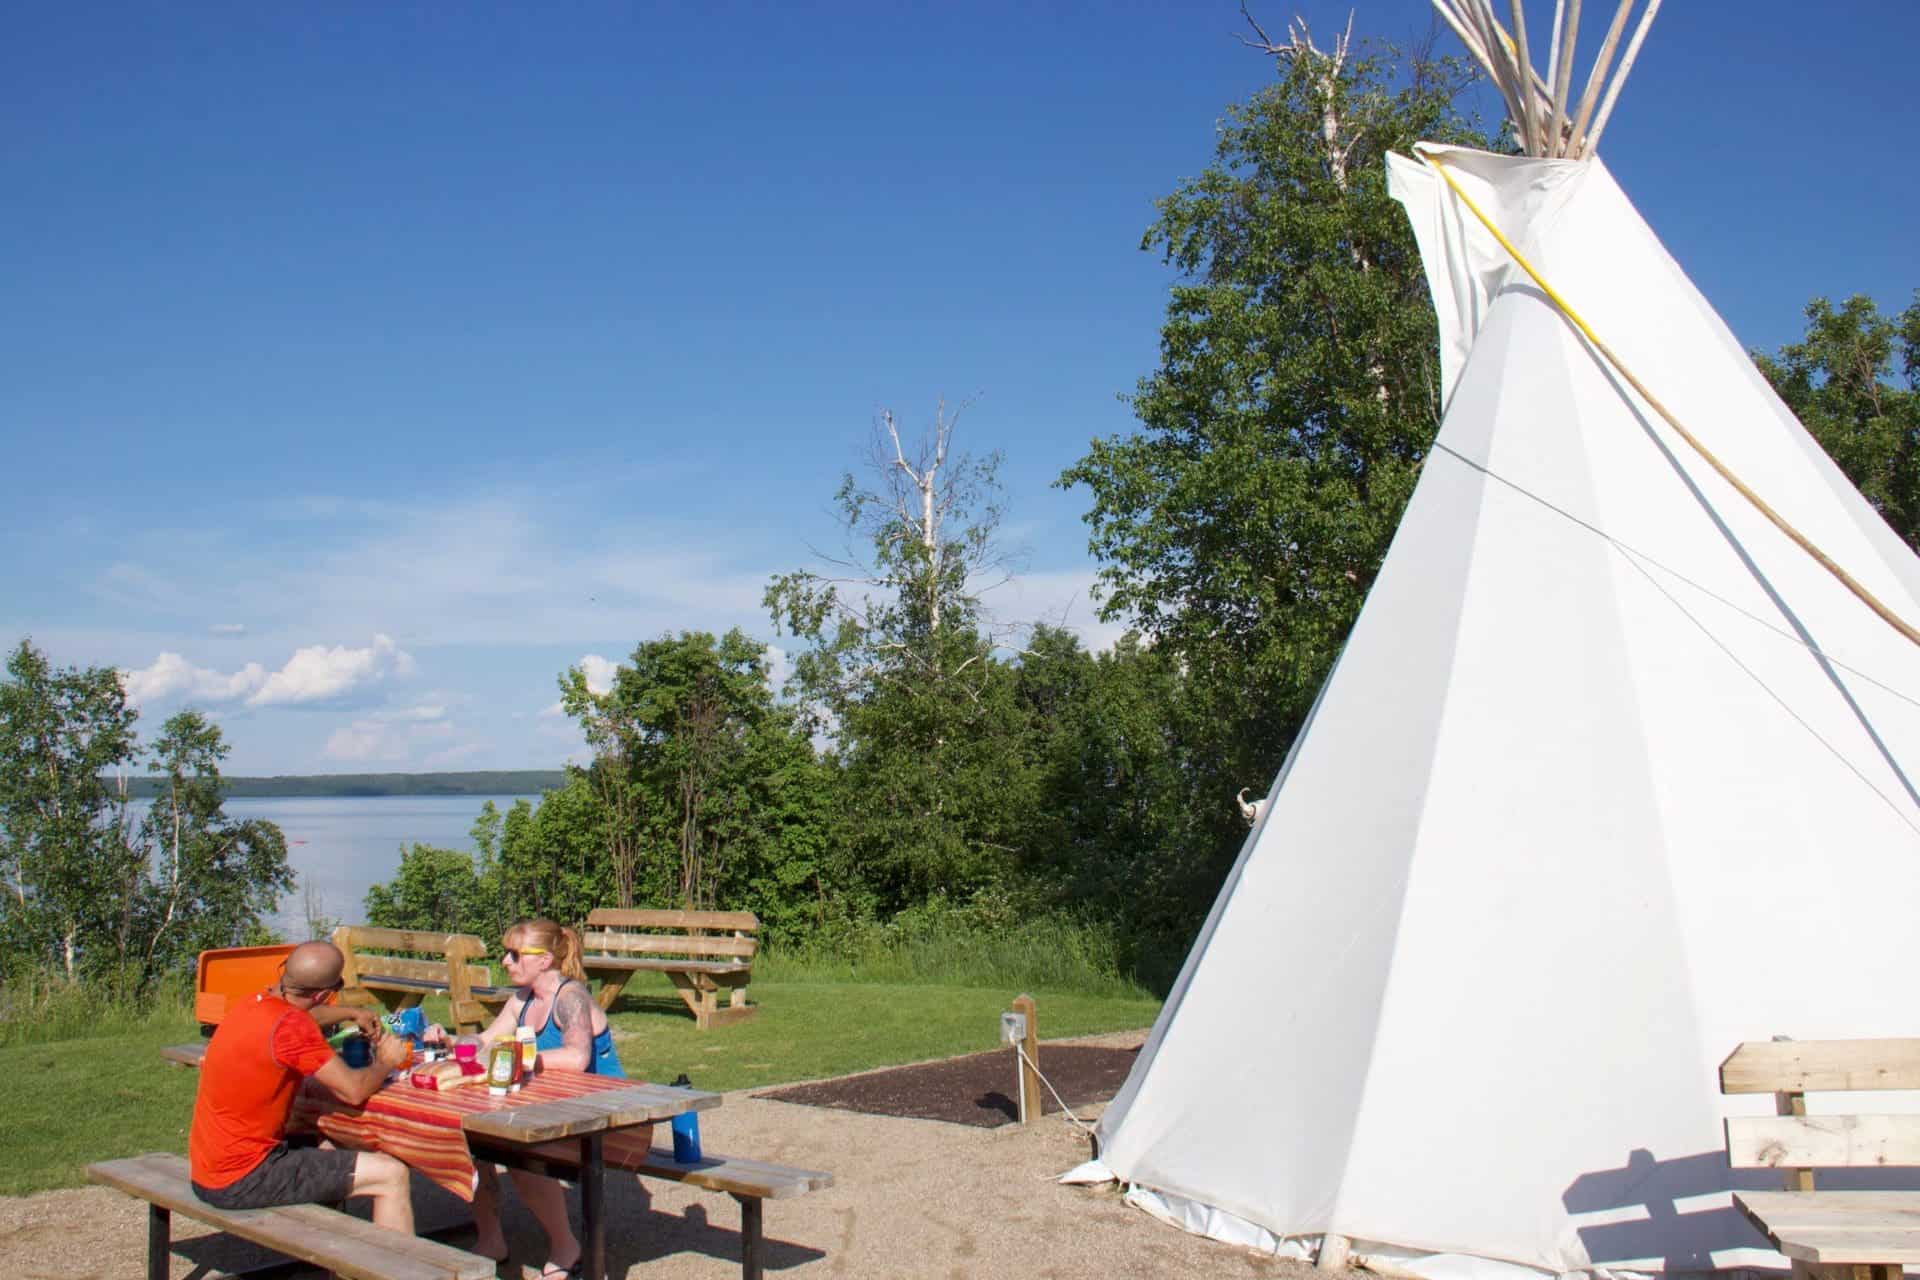 Featured Image for “Top 25 Things to Do in the Lac La Biche Region”